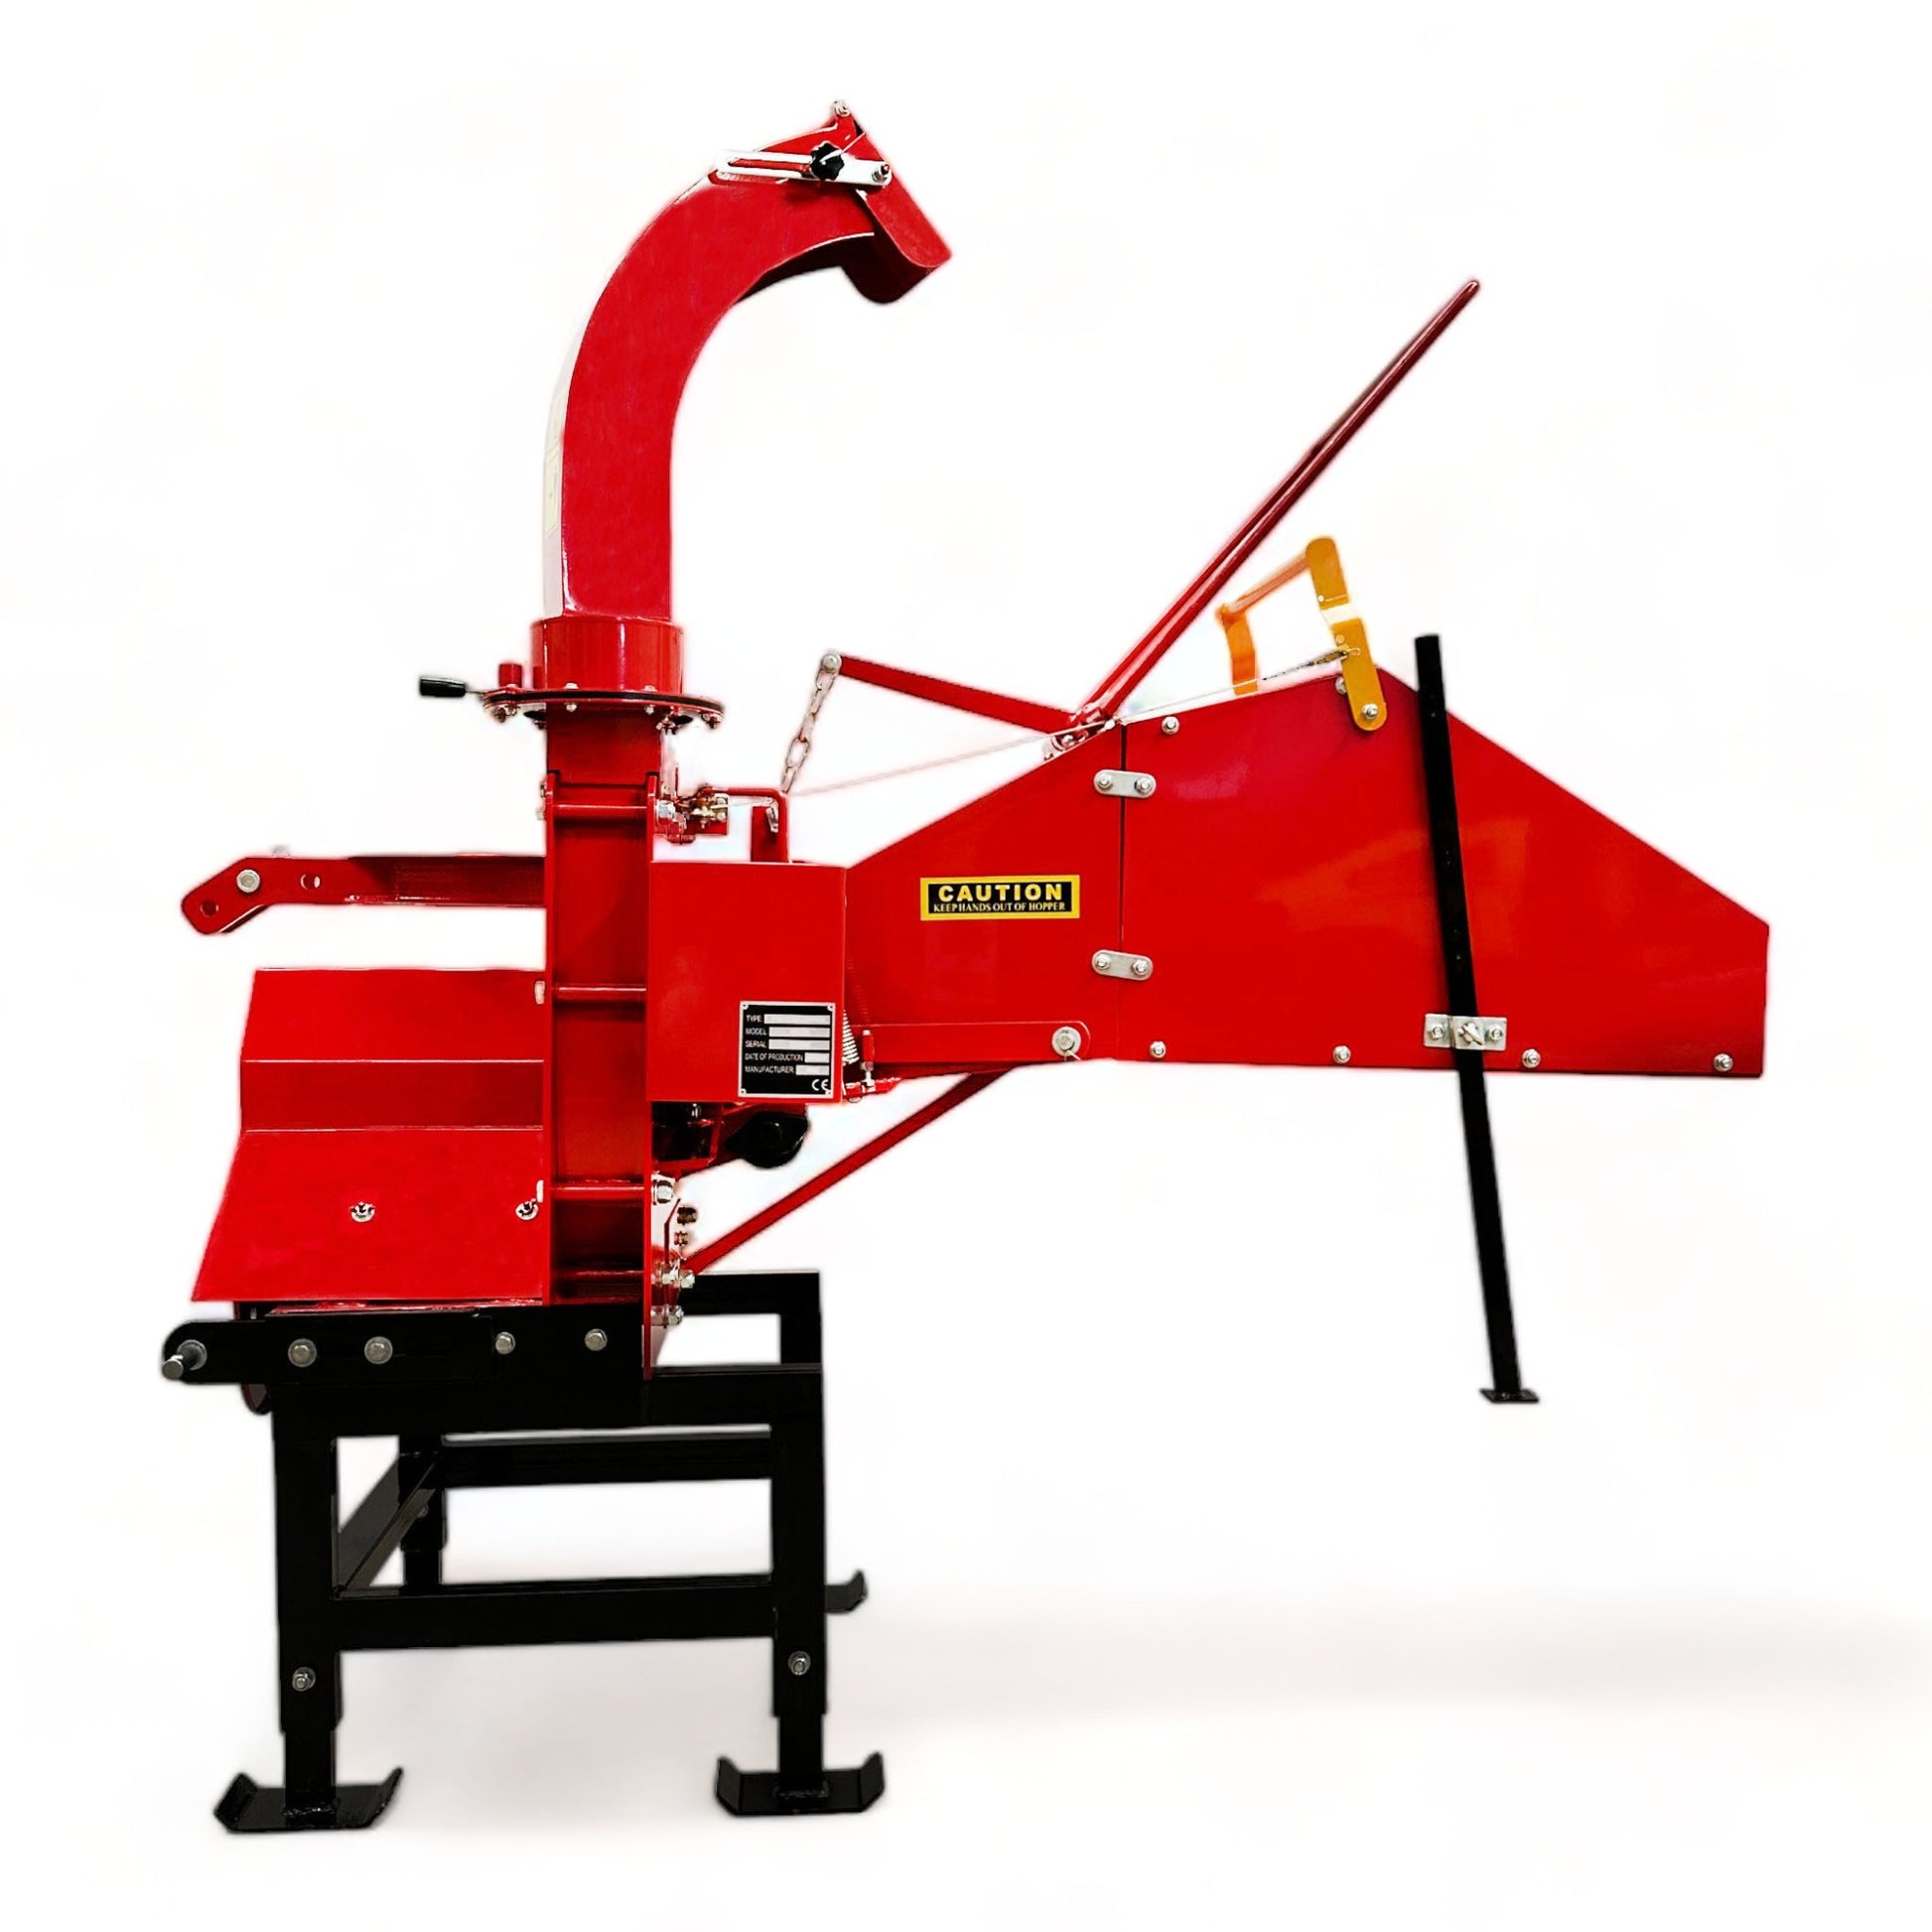 HOC8A 8" PTO Wood Chipper - With Auto Infeed